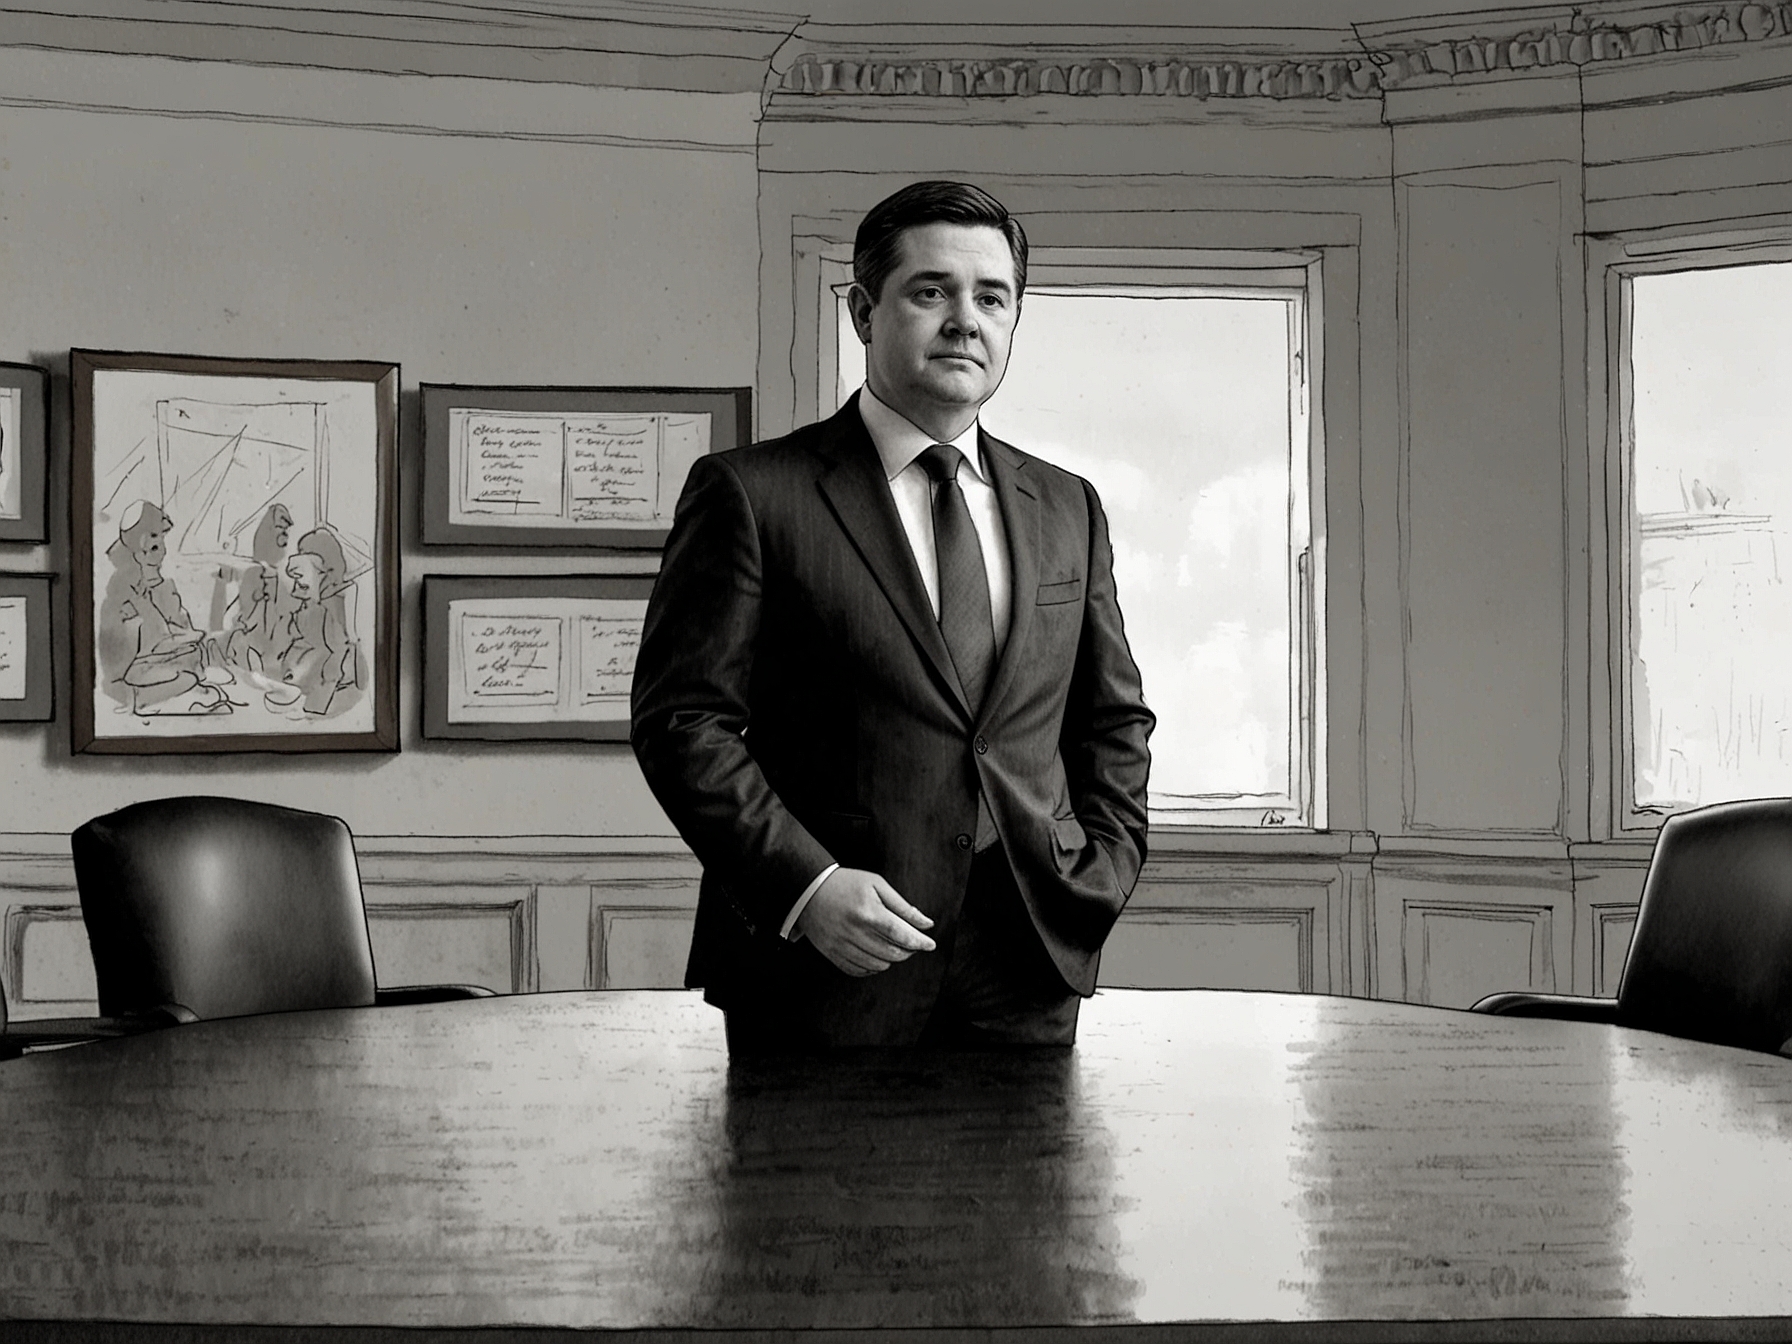 An illustration of Paschal Donohoe, standing alone at a negotiation table, symbolizing his solo role in the upcoming budget discussions if Michael McGrath moves to Brussels.